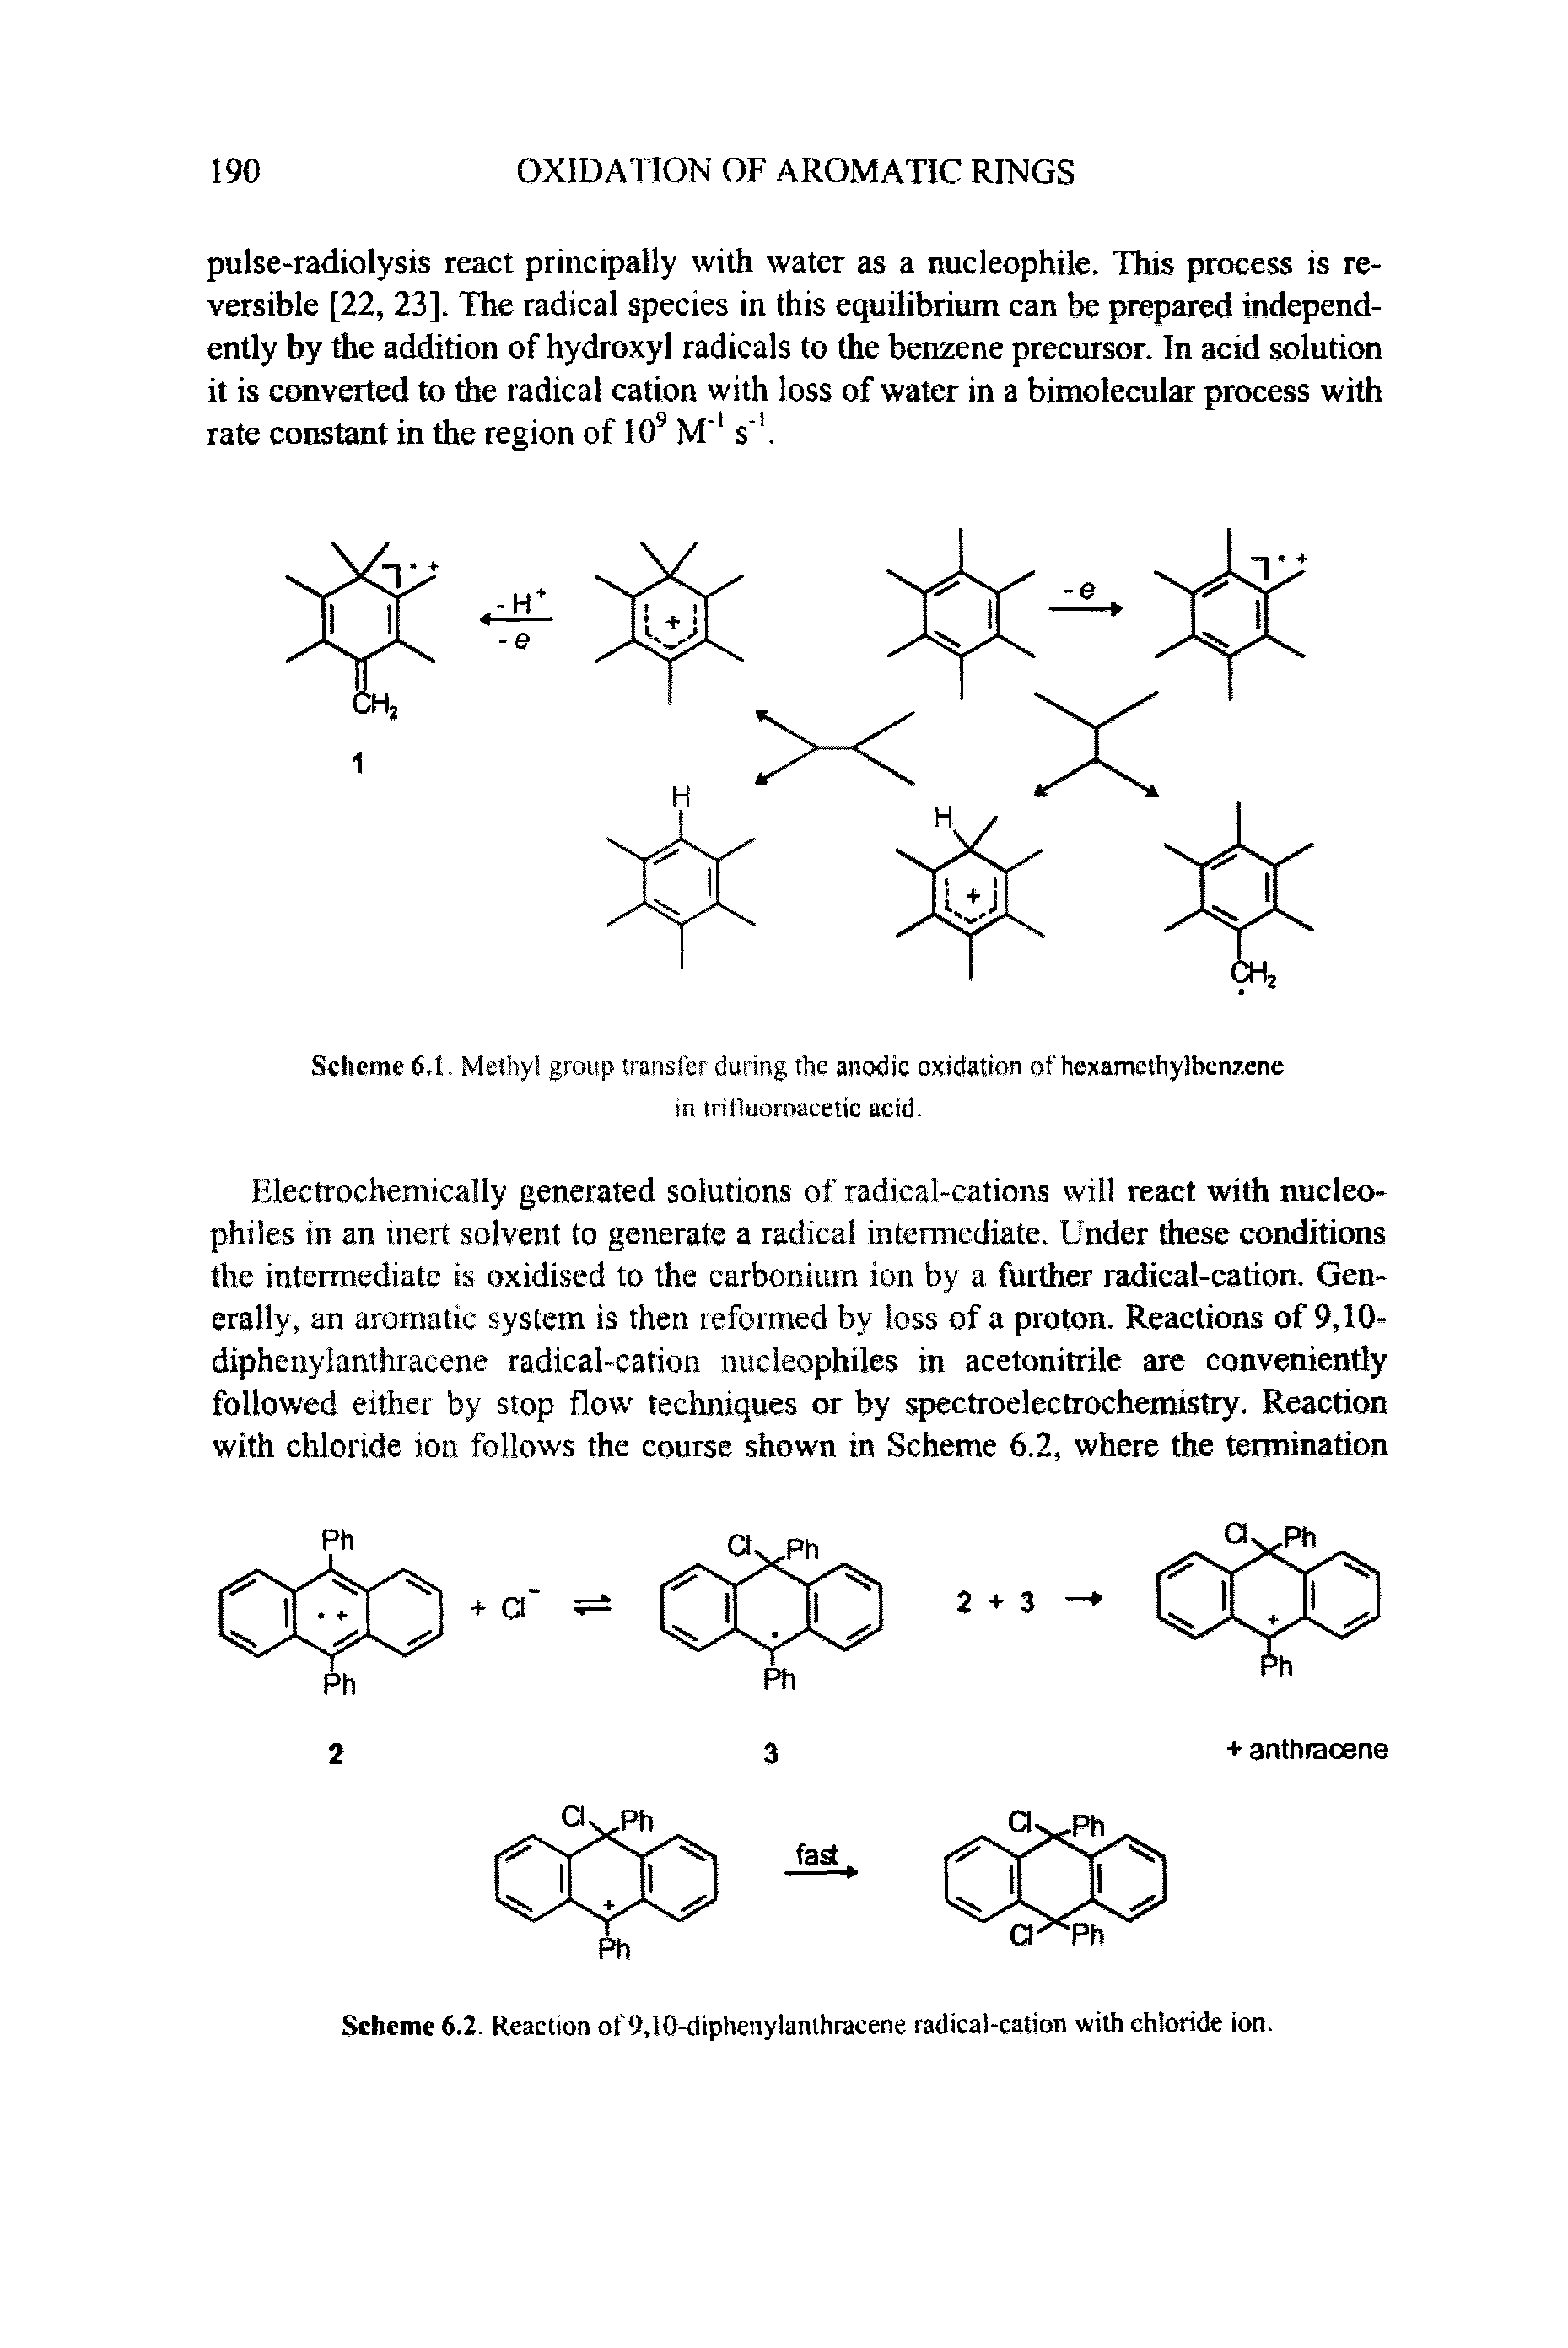 Scheme 6.2. Reaction or9,10-diphenylanthracene radical-cation with chloride ion.